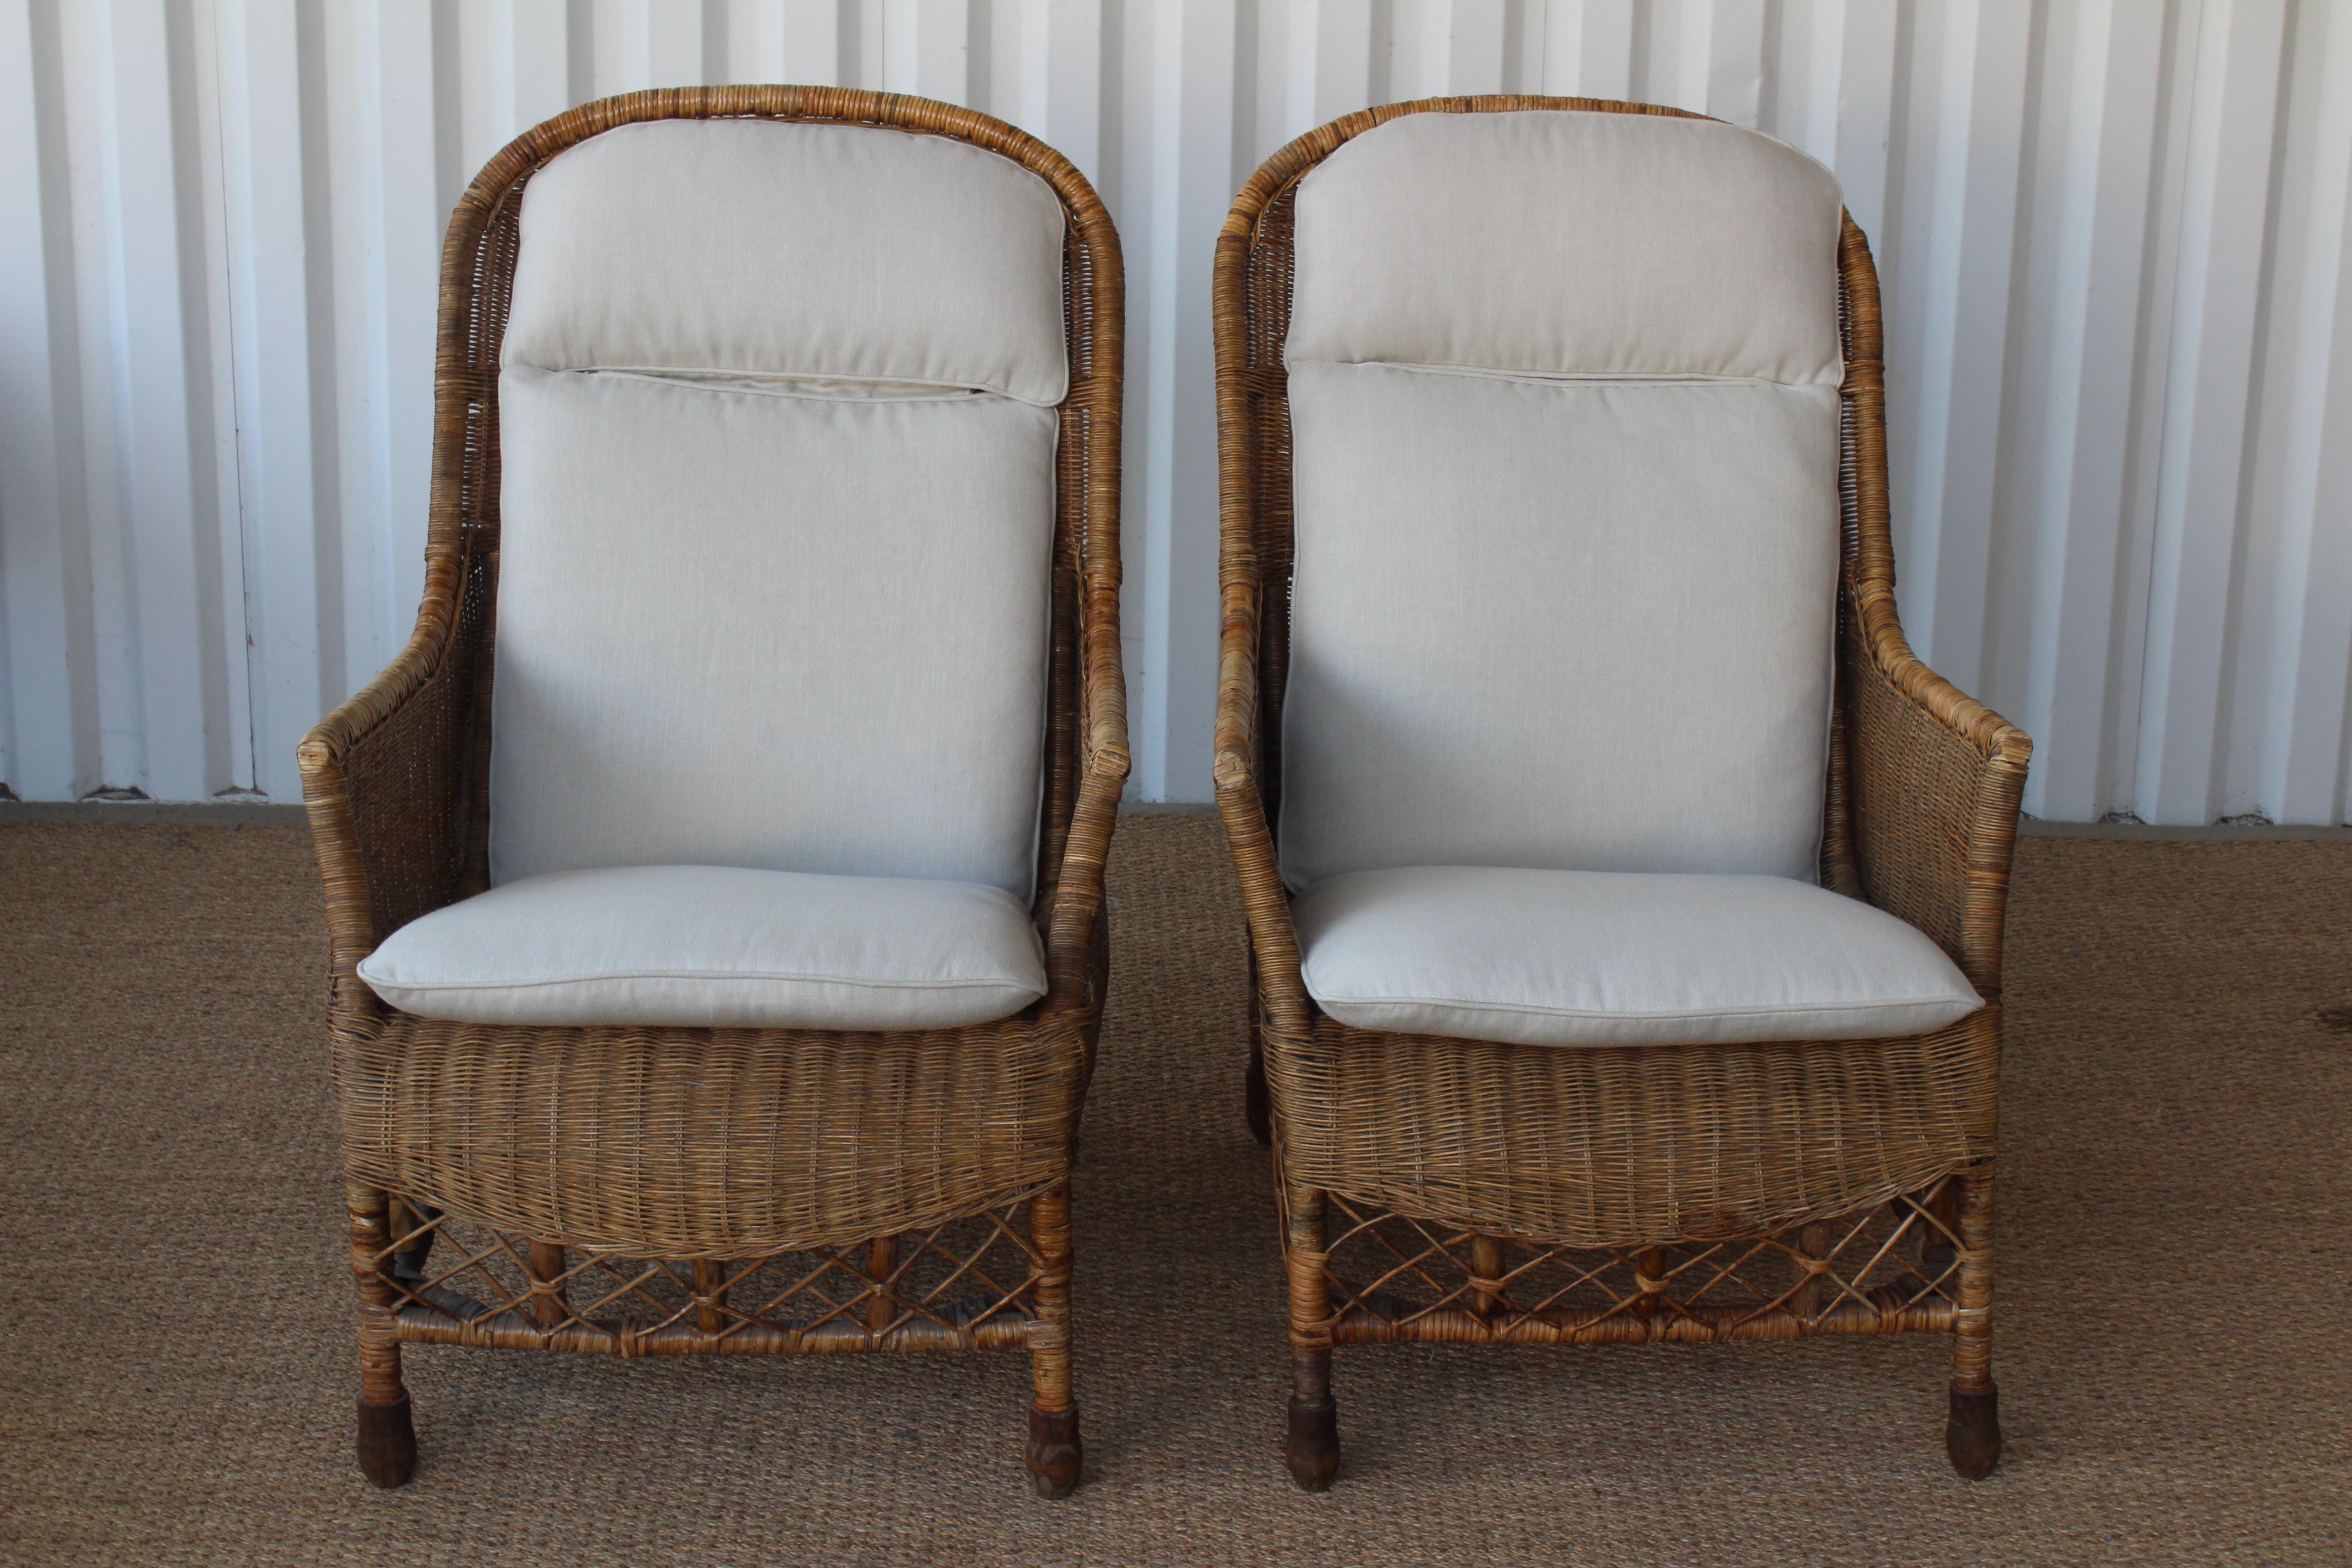 Italian Bamboo and Wicker Lounge Chair, Italy, 1960s. One Available. 